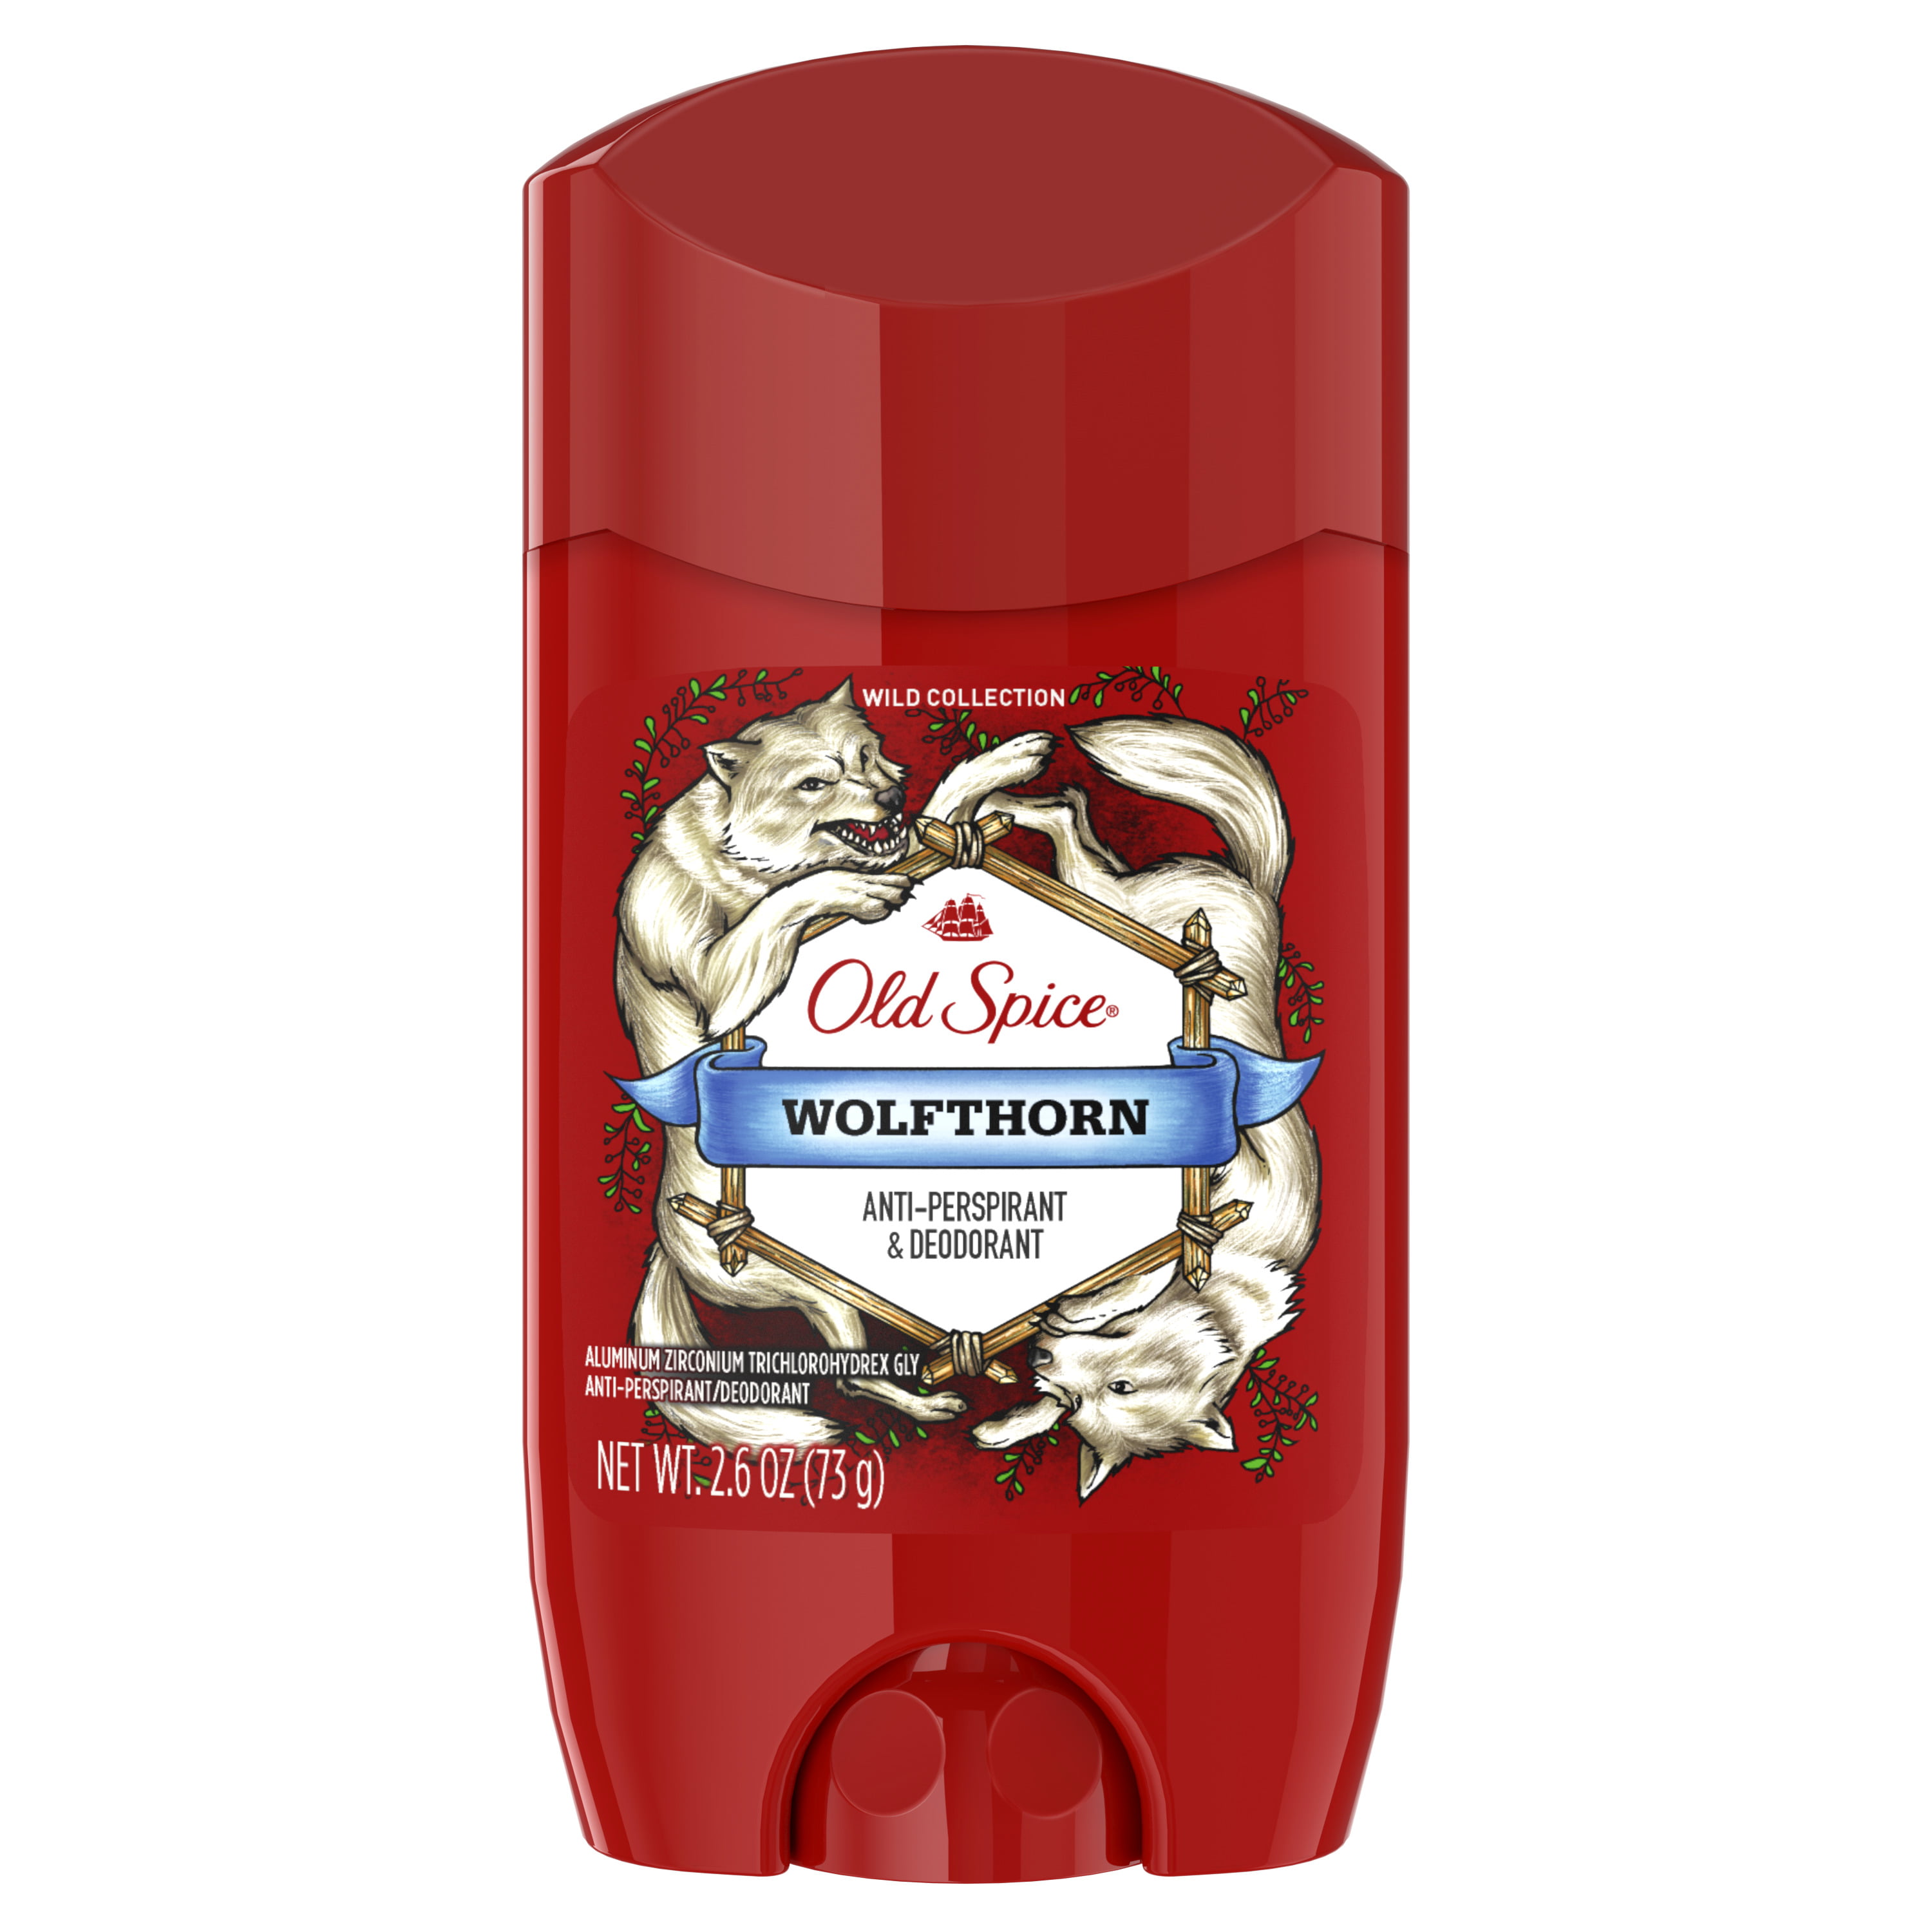 Wild collection. Old Spice Wolfthorn дезодорант. Дезодорант стик old Spice Wolfthorn. Wolfthorn дезодорант твердый 85мл.